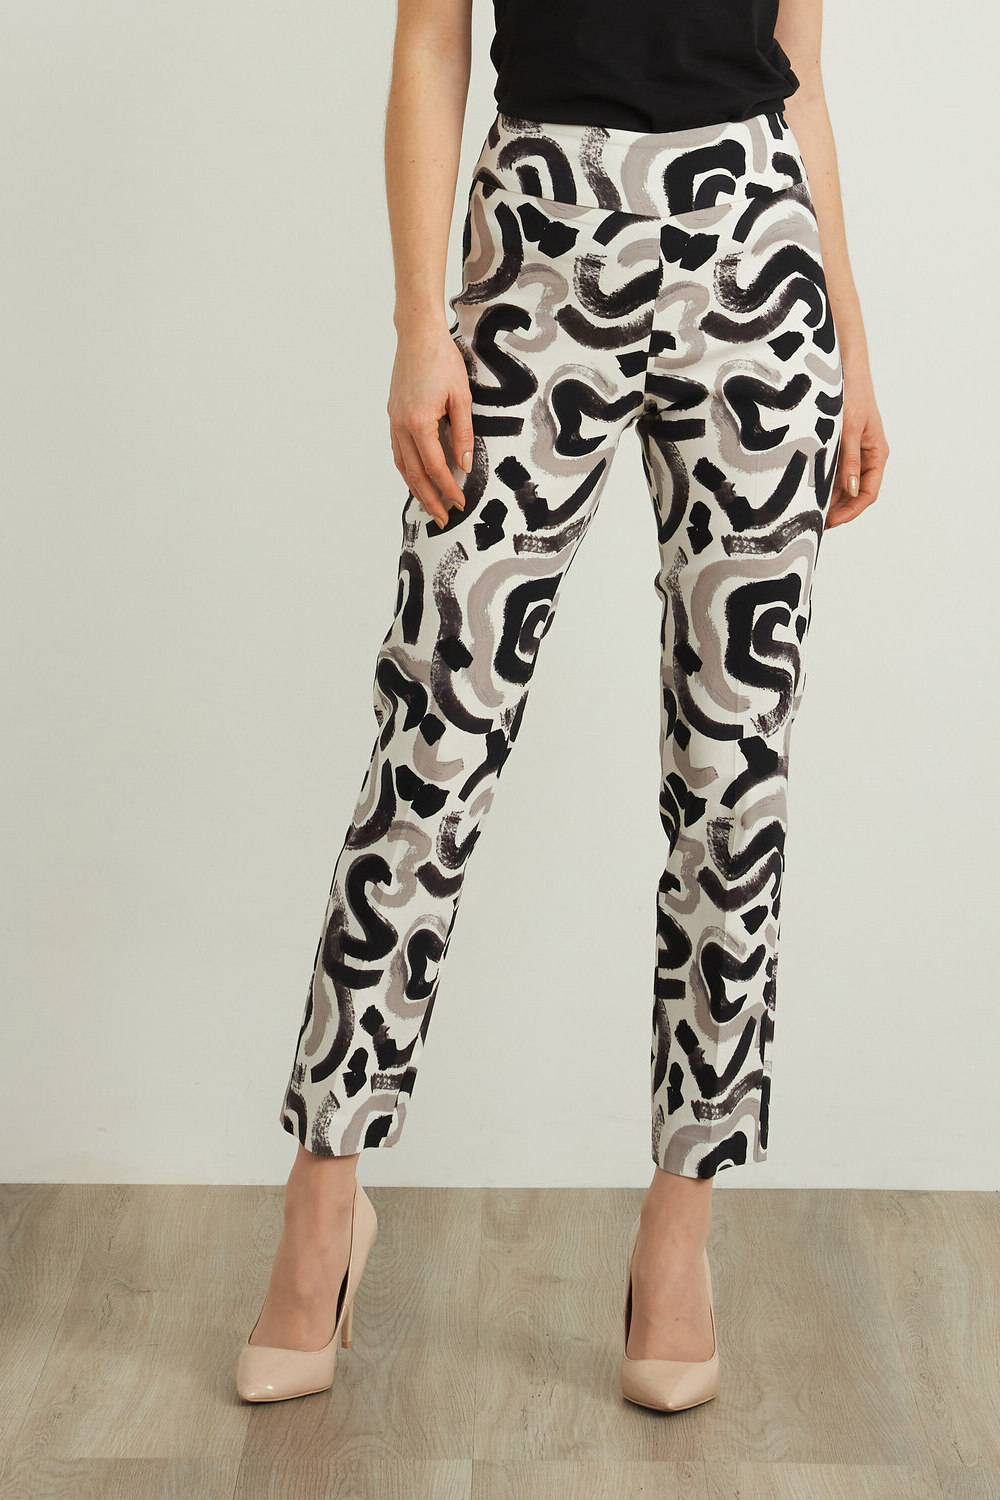 Joseph Ribkoff Abstract Cropped Pant Style 212140. White/grey/black